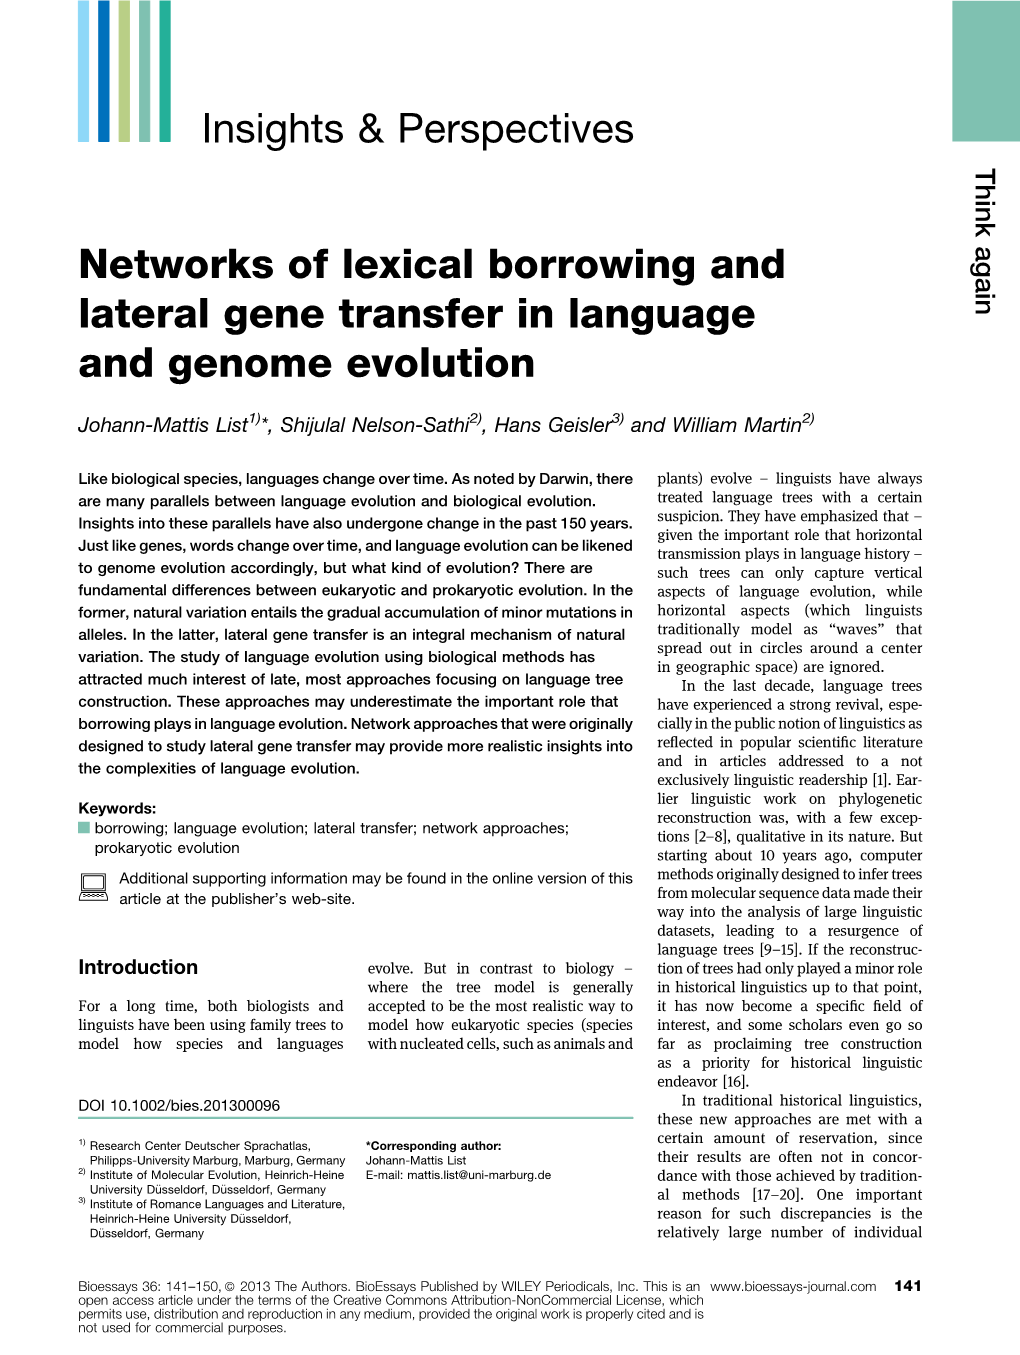 Networks of Lexical Borrowing and Lateral Gene Transfer in Language and Genome Evolution